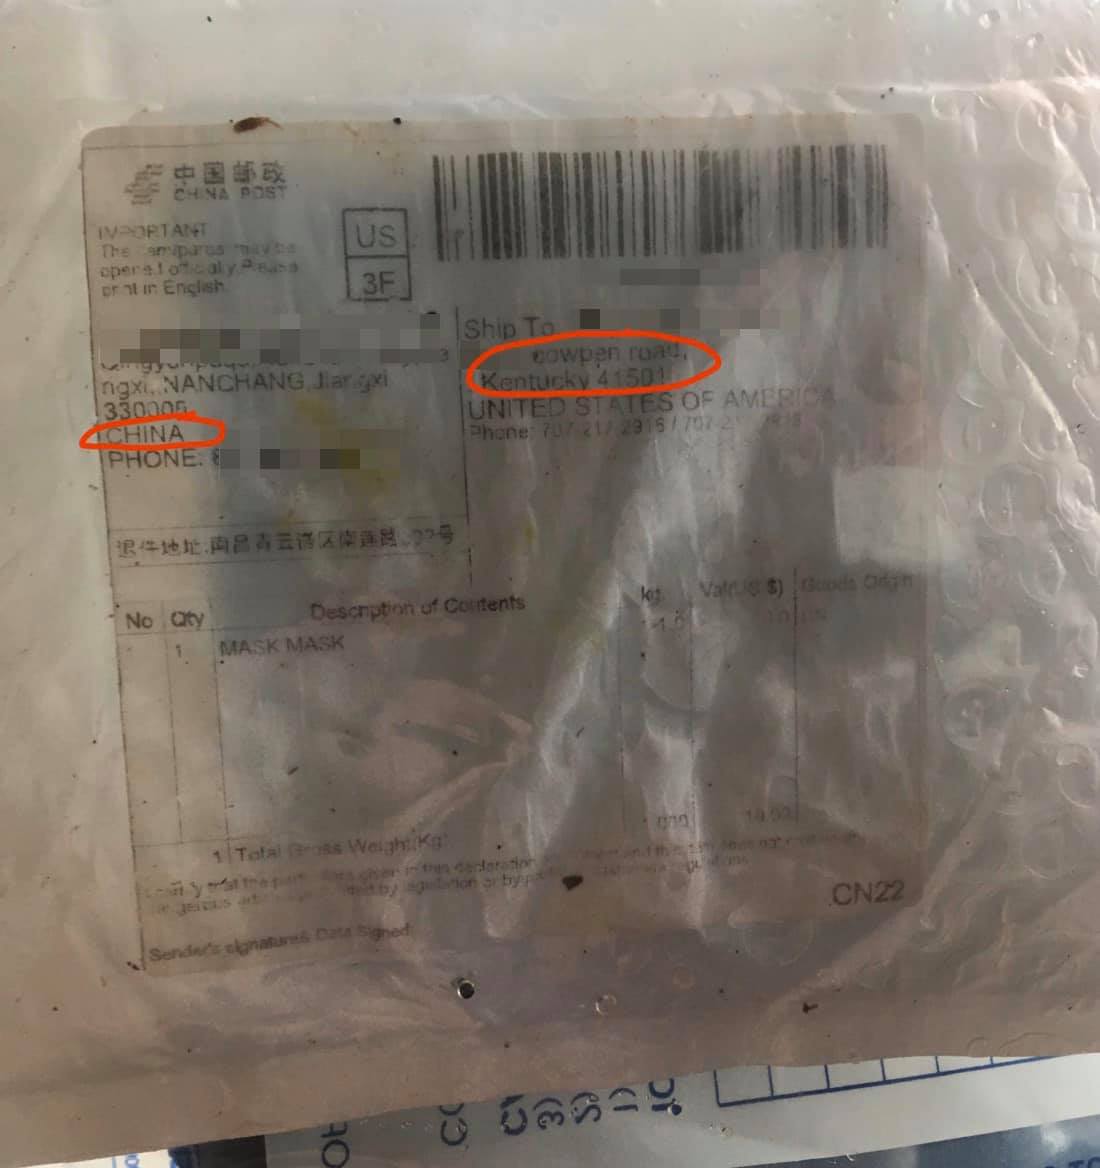 More packages from China appearing in Eastern Kentucky